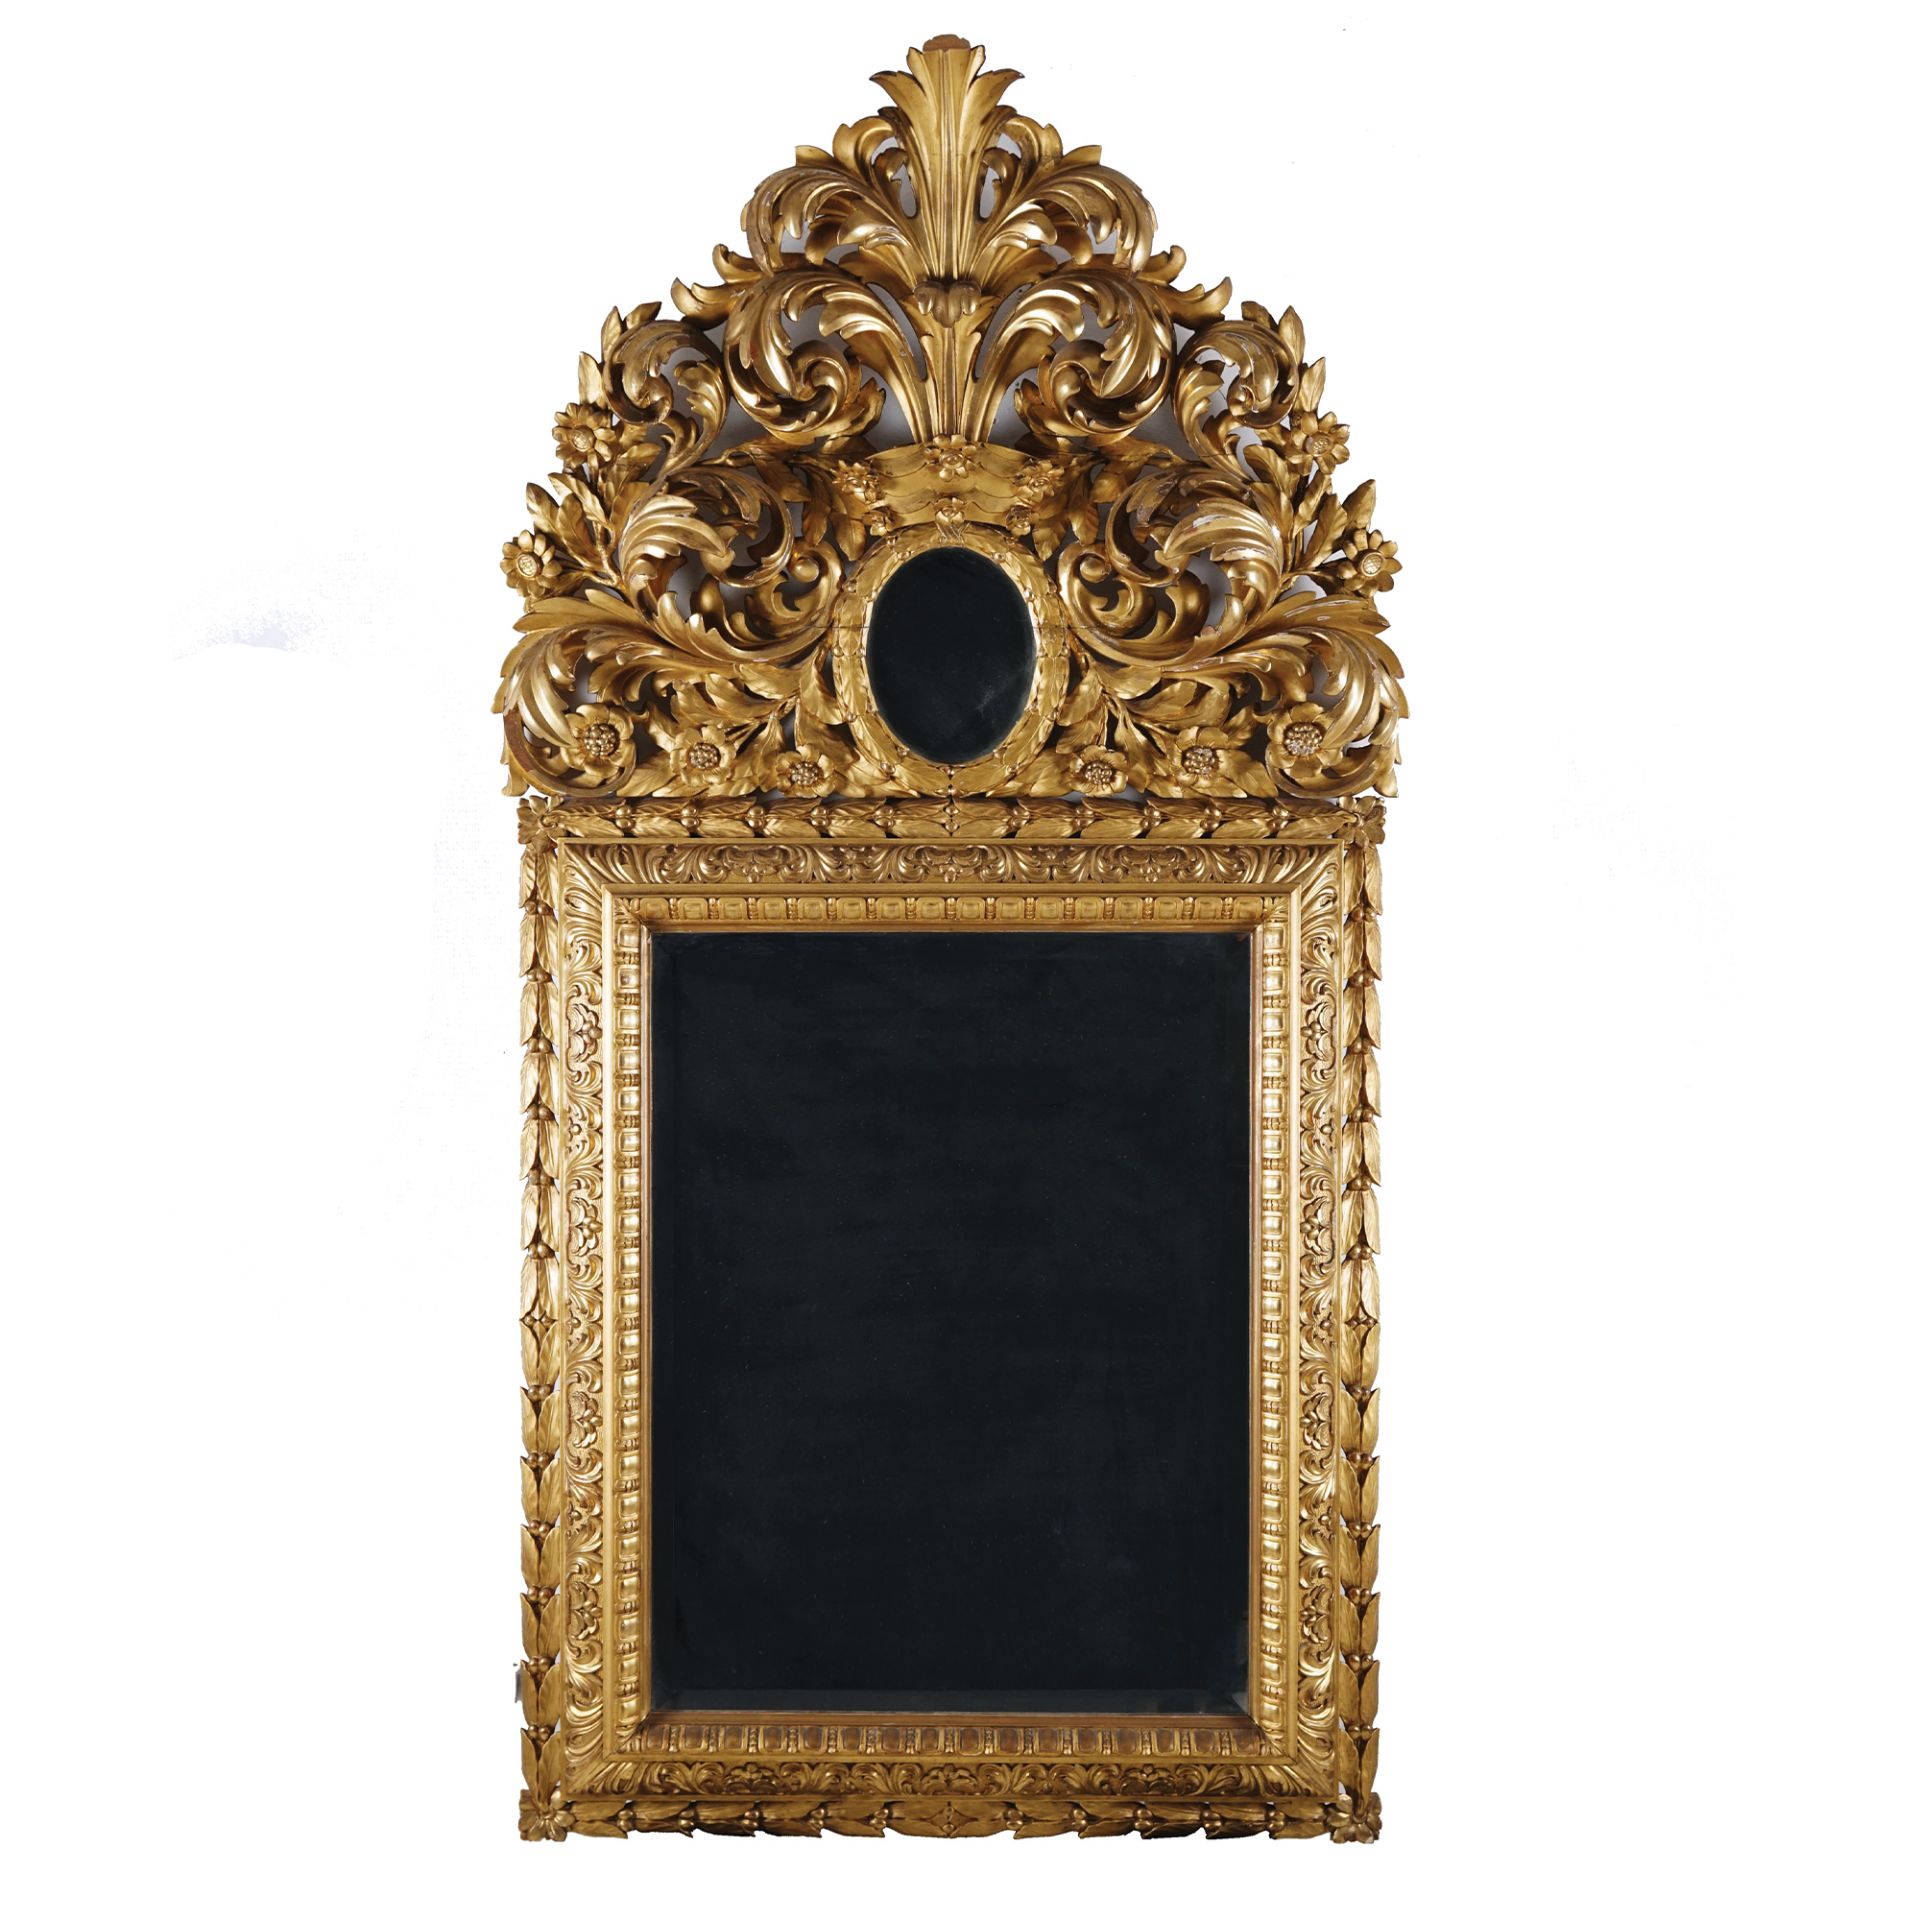 A carved gilt wood wall mirror, 19th century